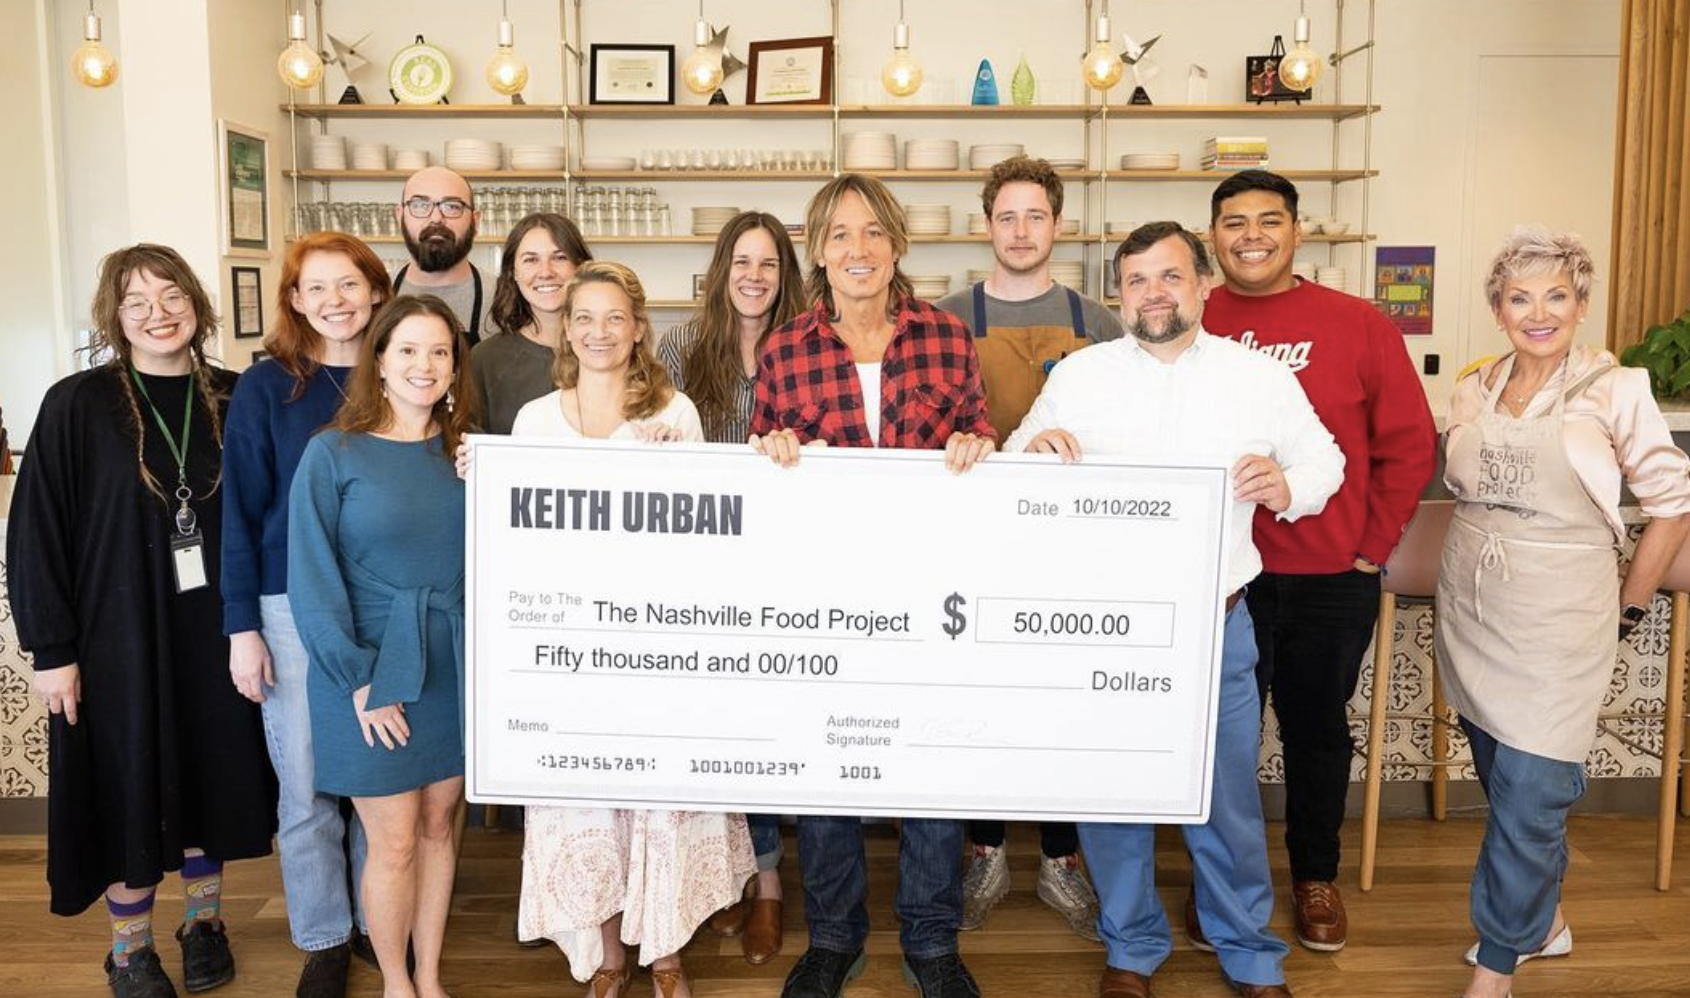 Keith Urban presents $50,000 check to The Nashville Food Project